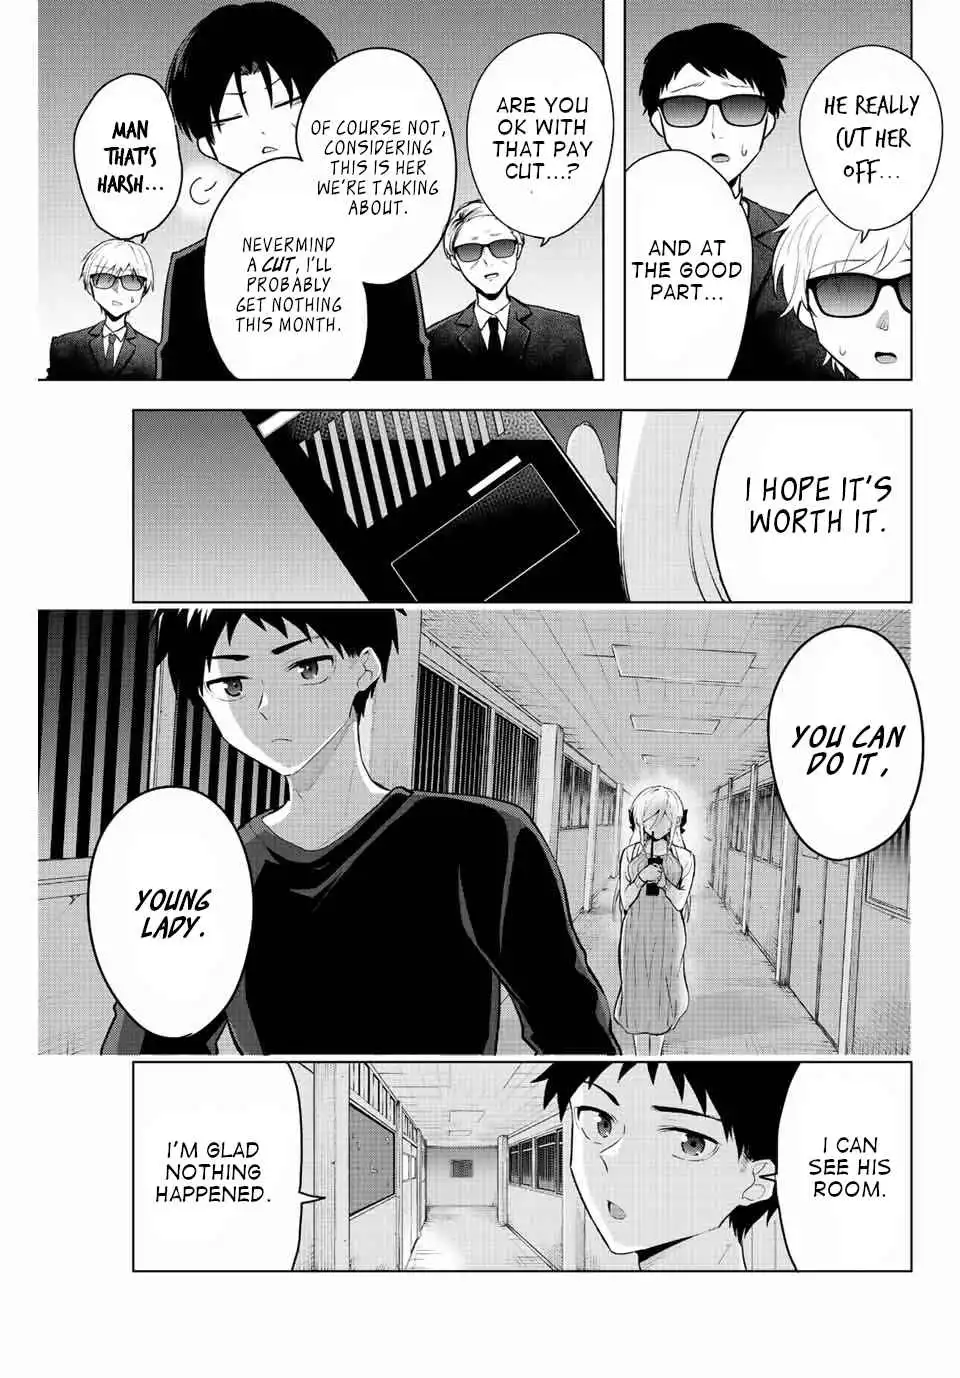 The death game is all that Saotome-san has left Chapter 8